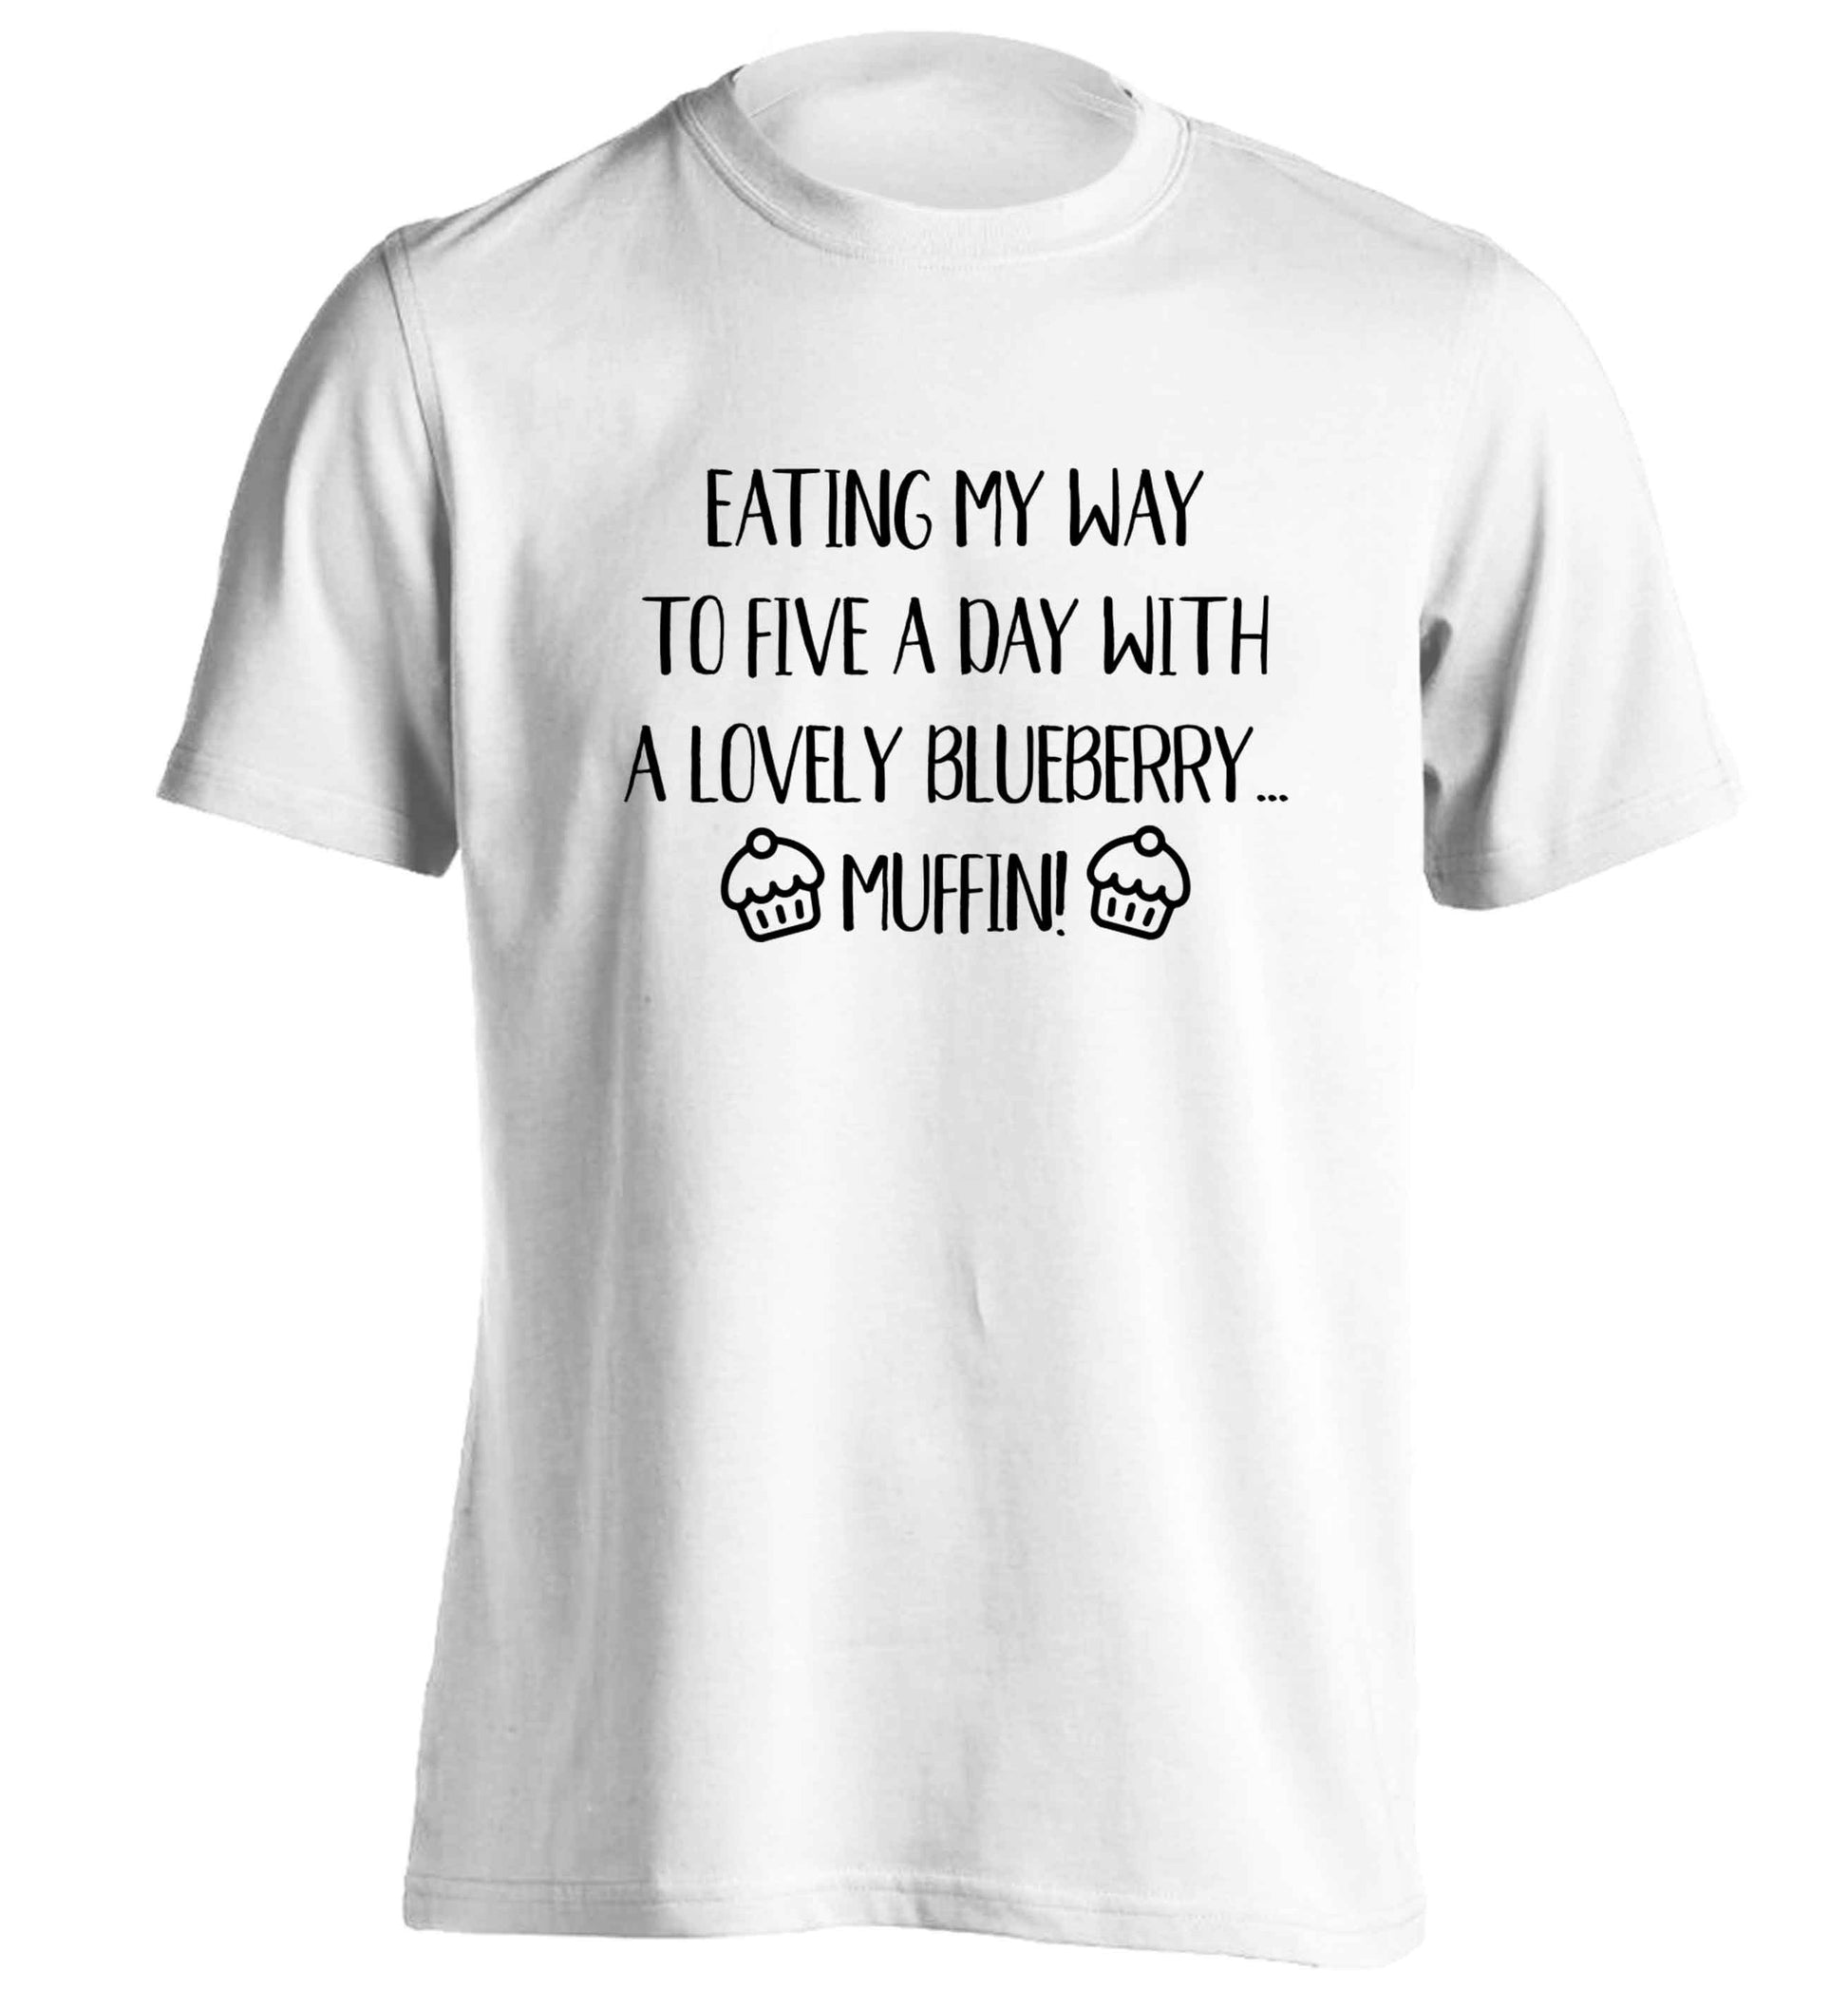 Eating my way to five a day with a lovely blueberry muffin adults unisex white Tshirt 2XL